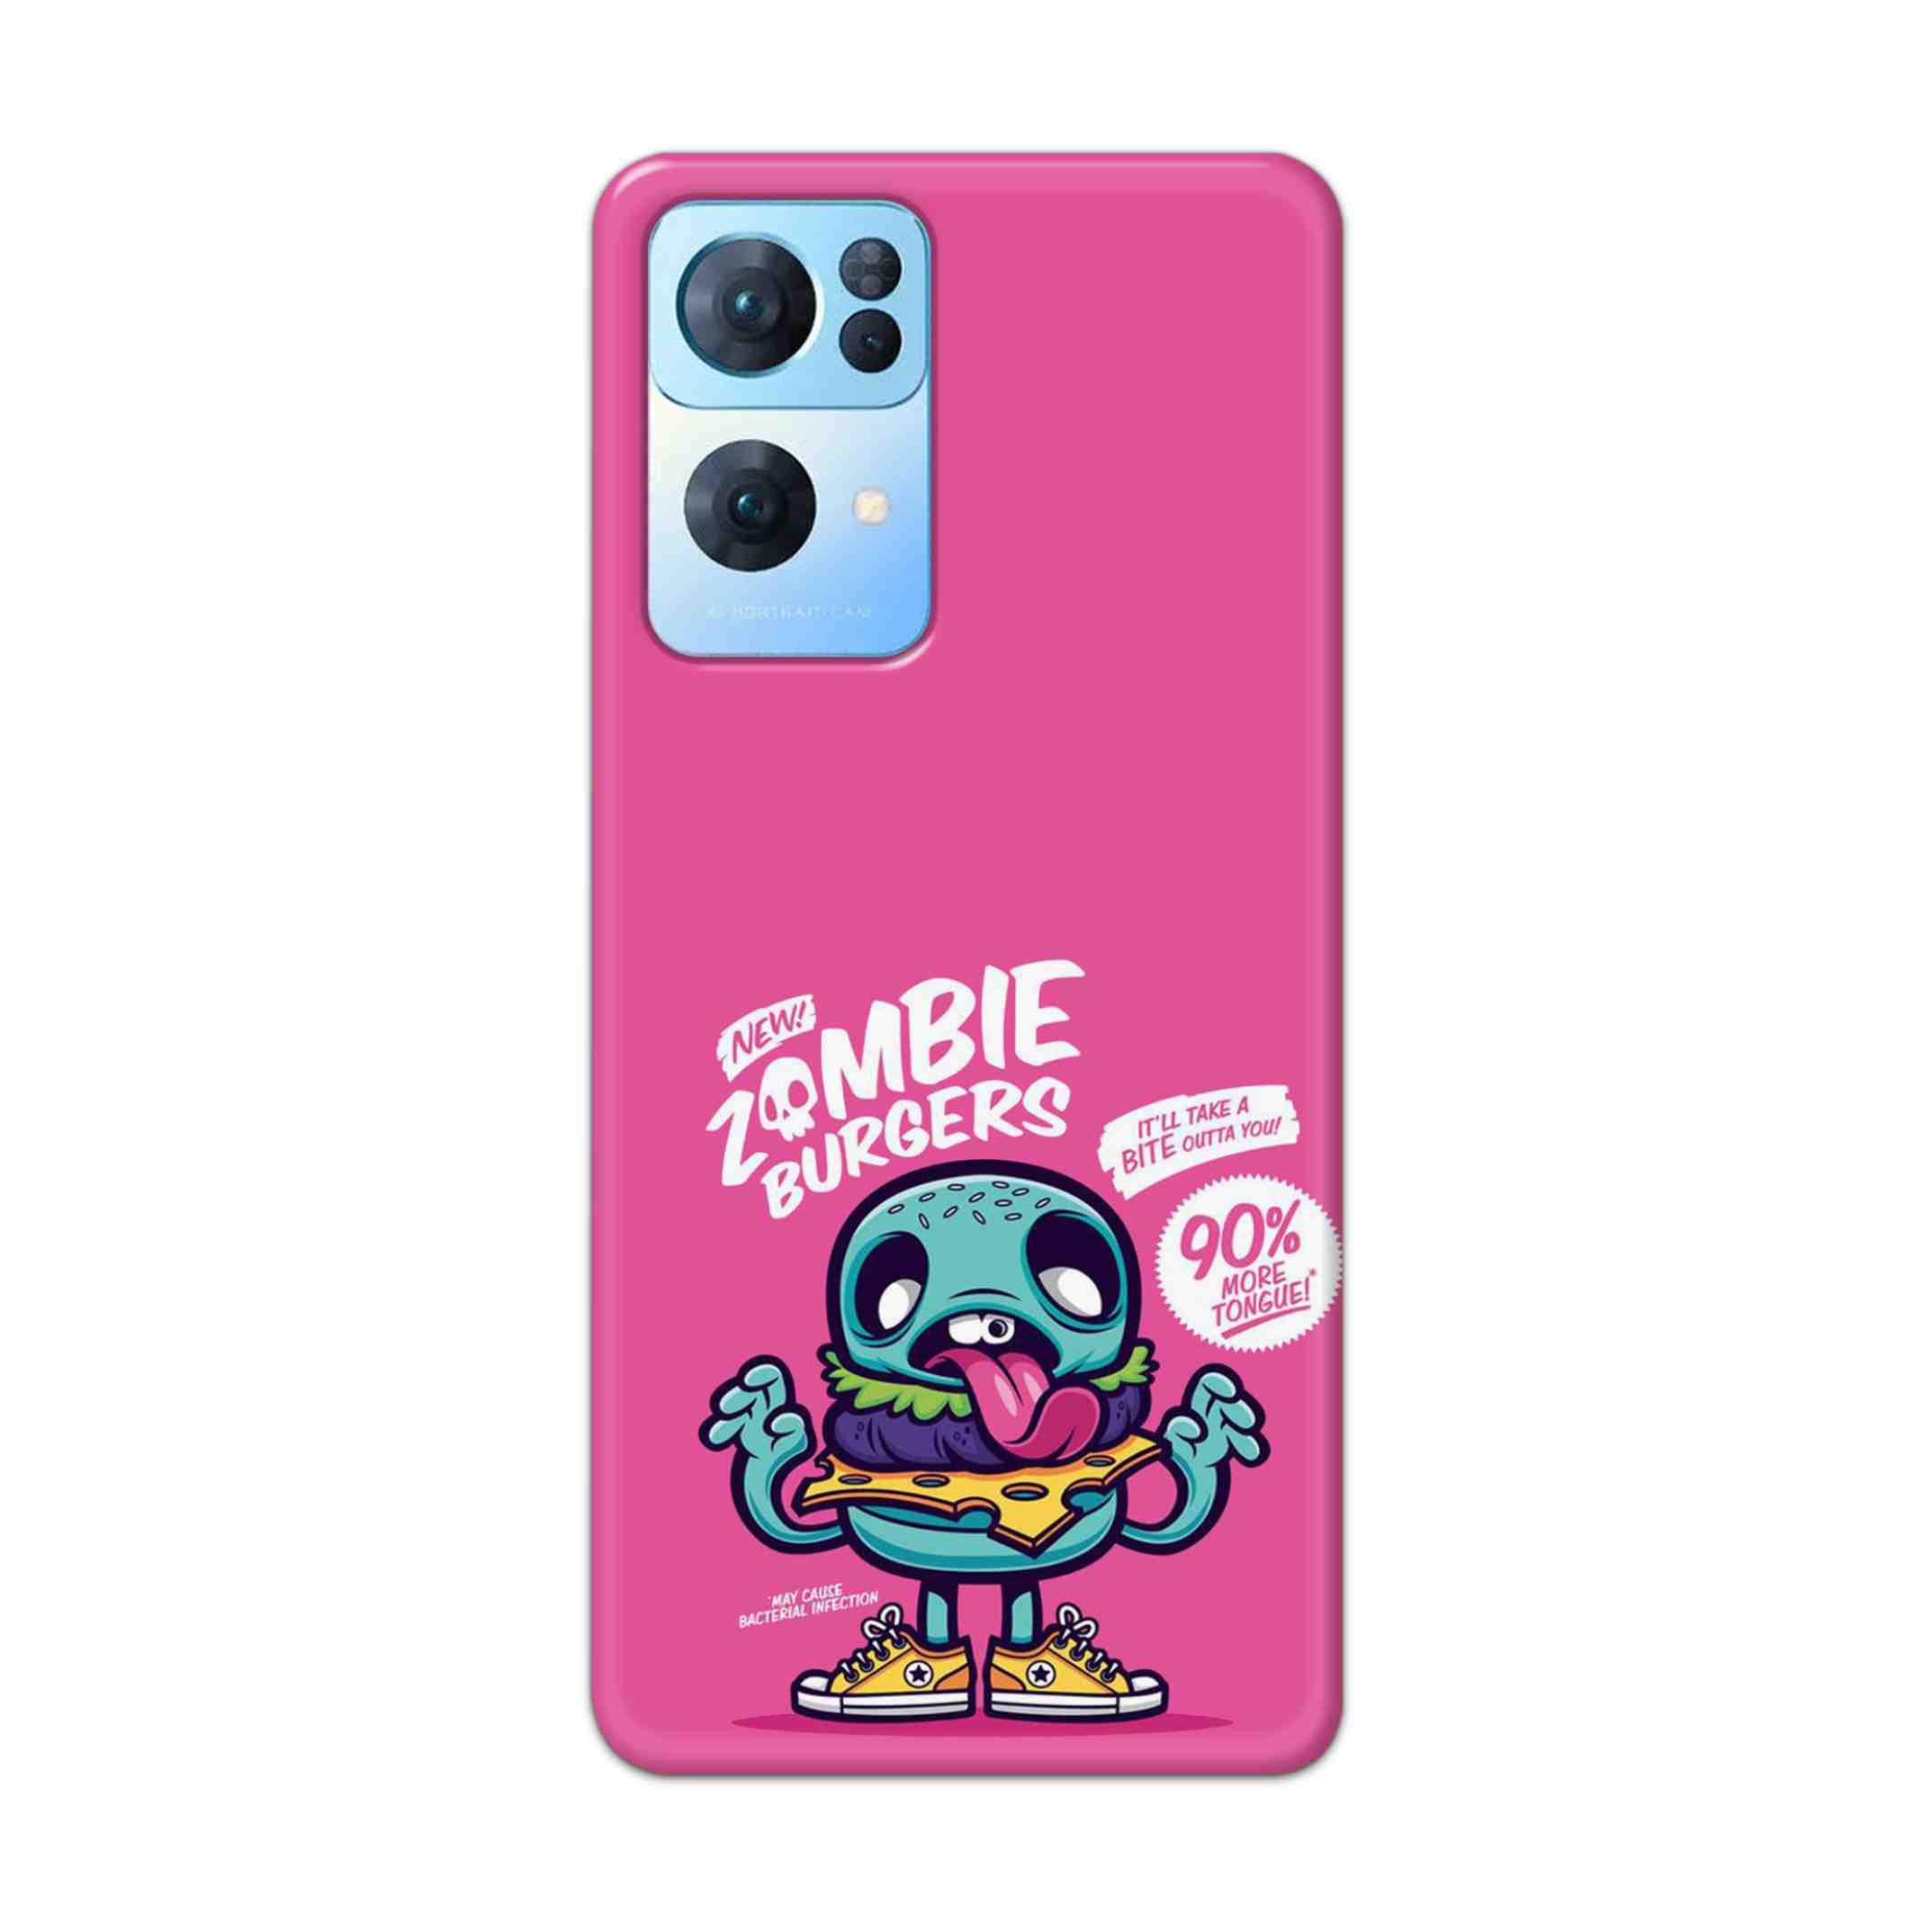 Buy New Zombie Burgers Hard Back Mobile Phone Case Cover For Oppo Reno 7 Pro Online